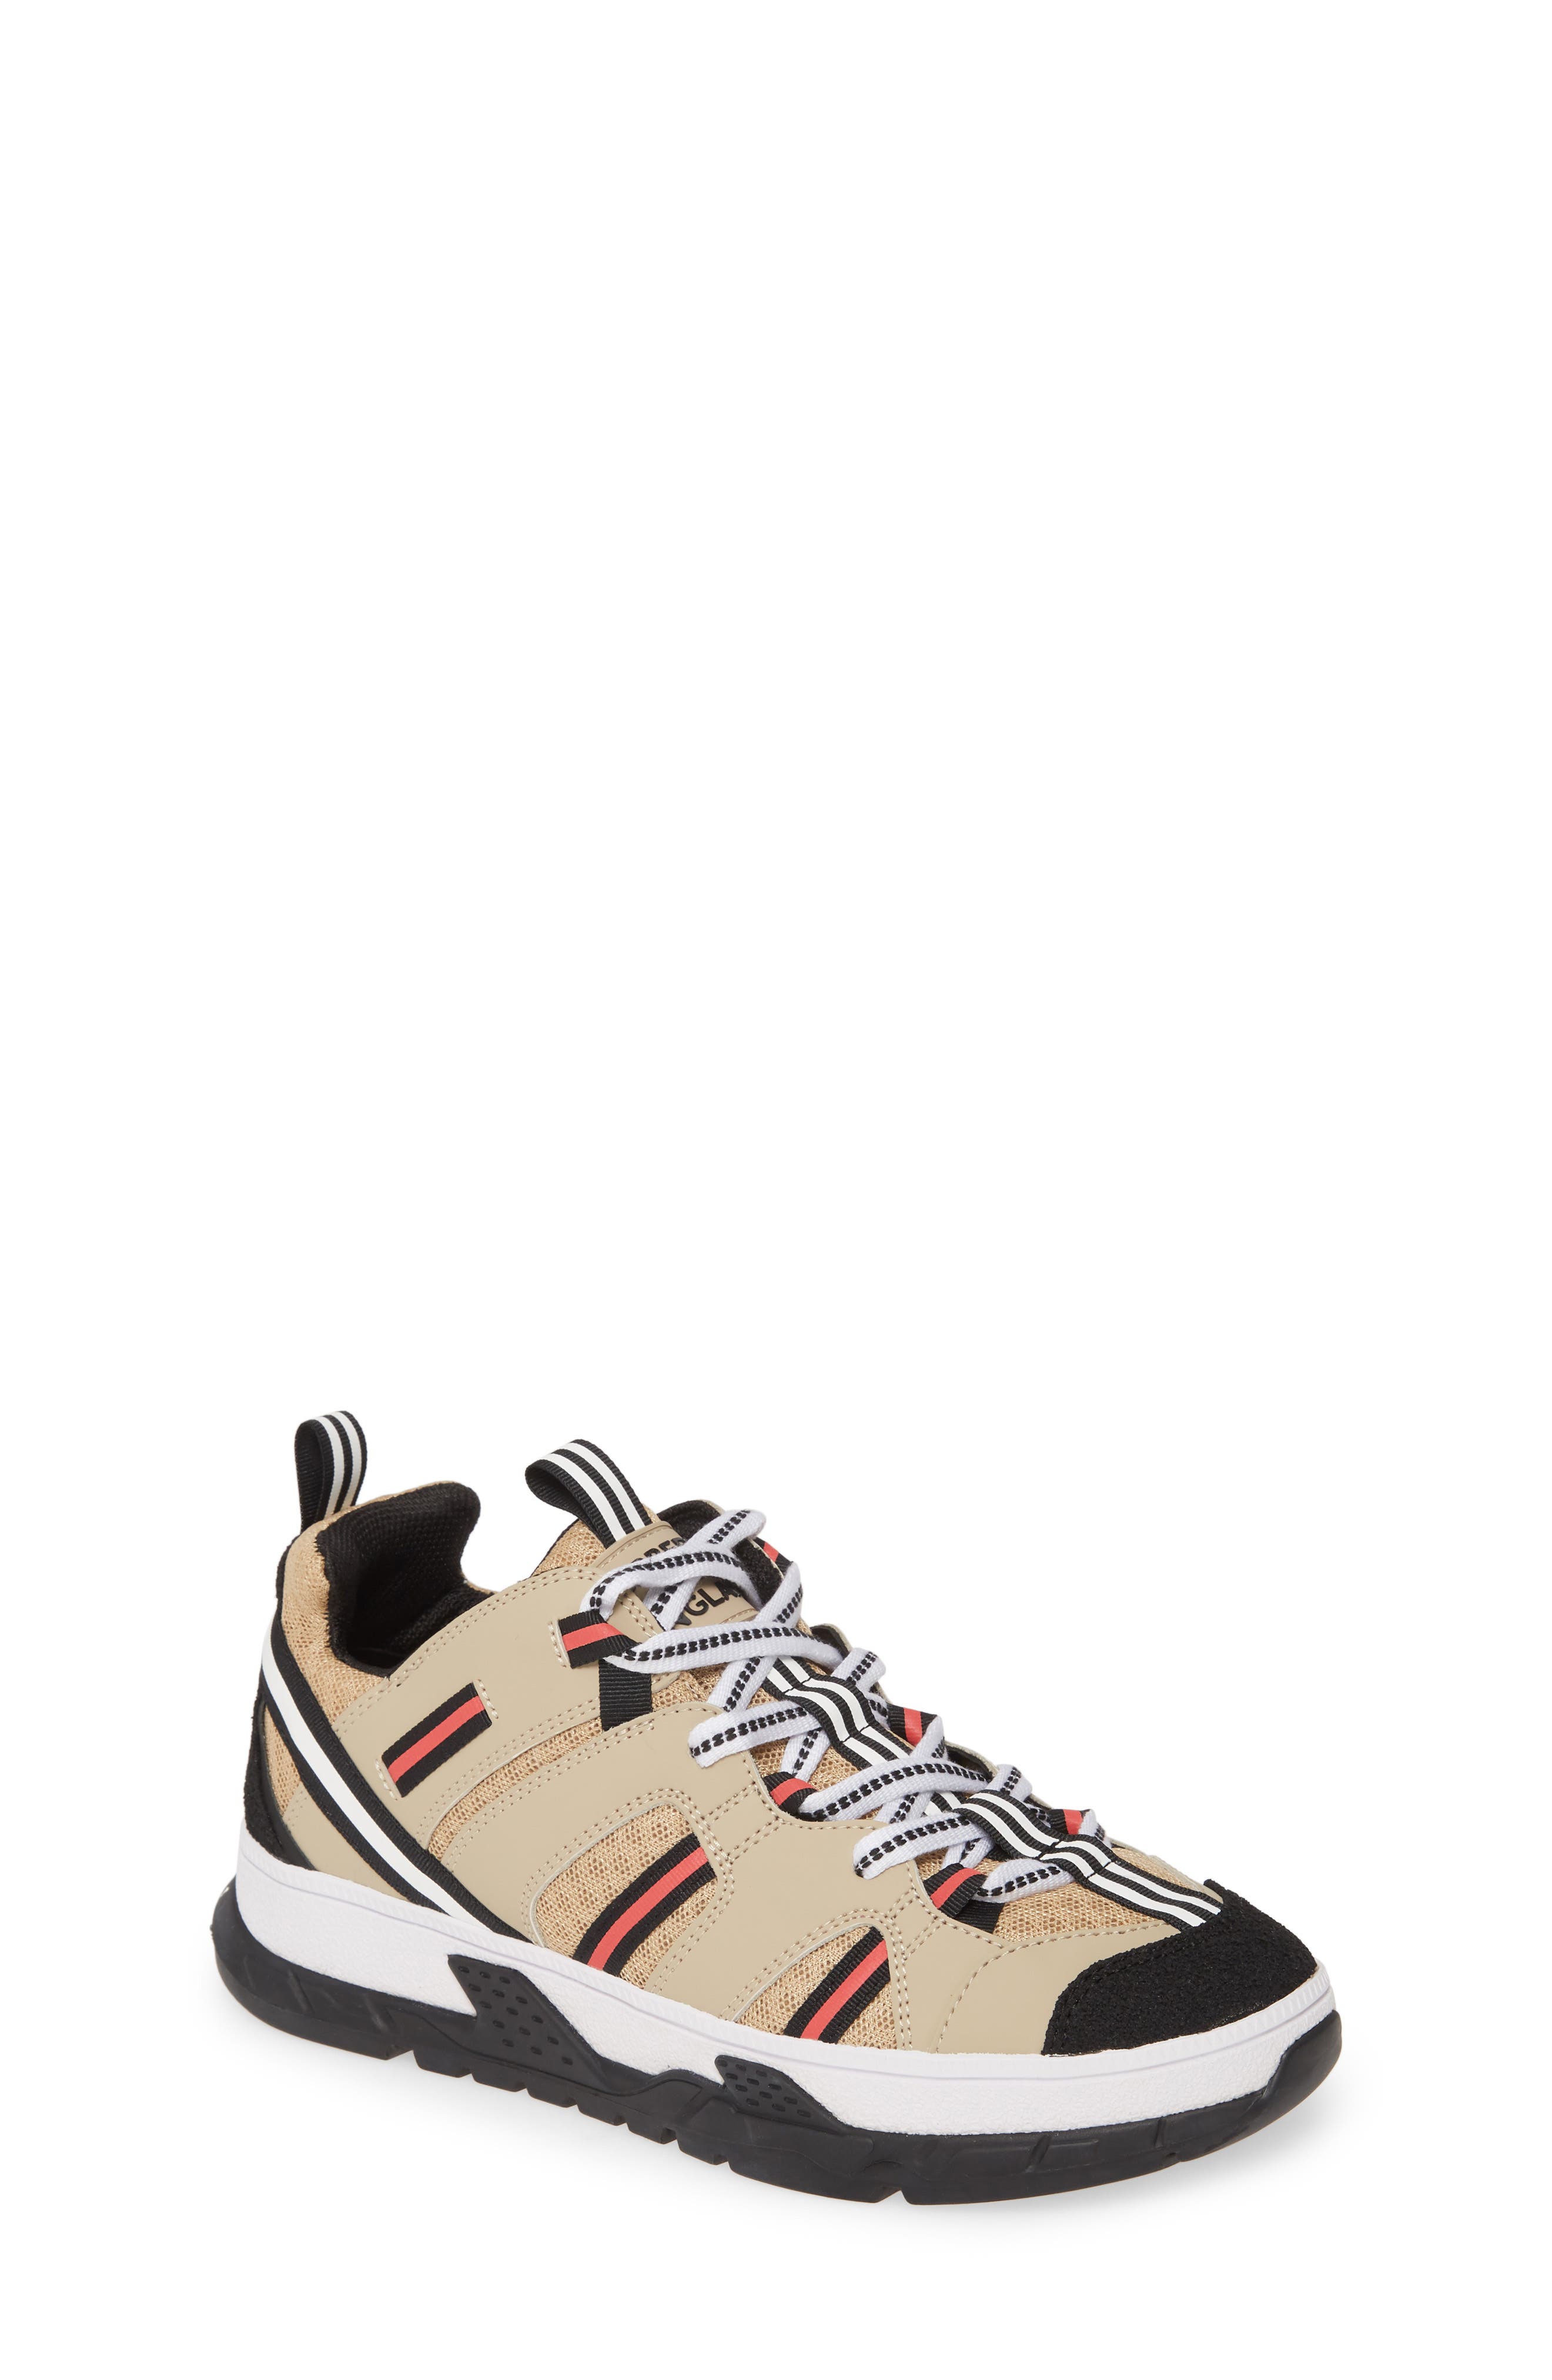 burberry sneakers for kids